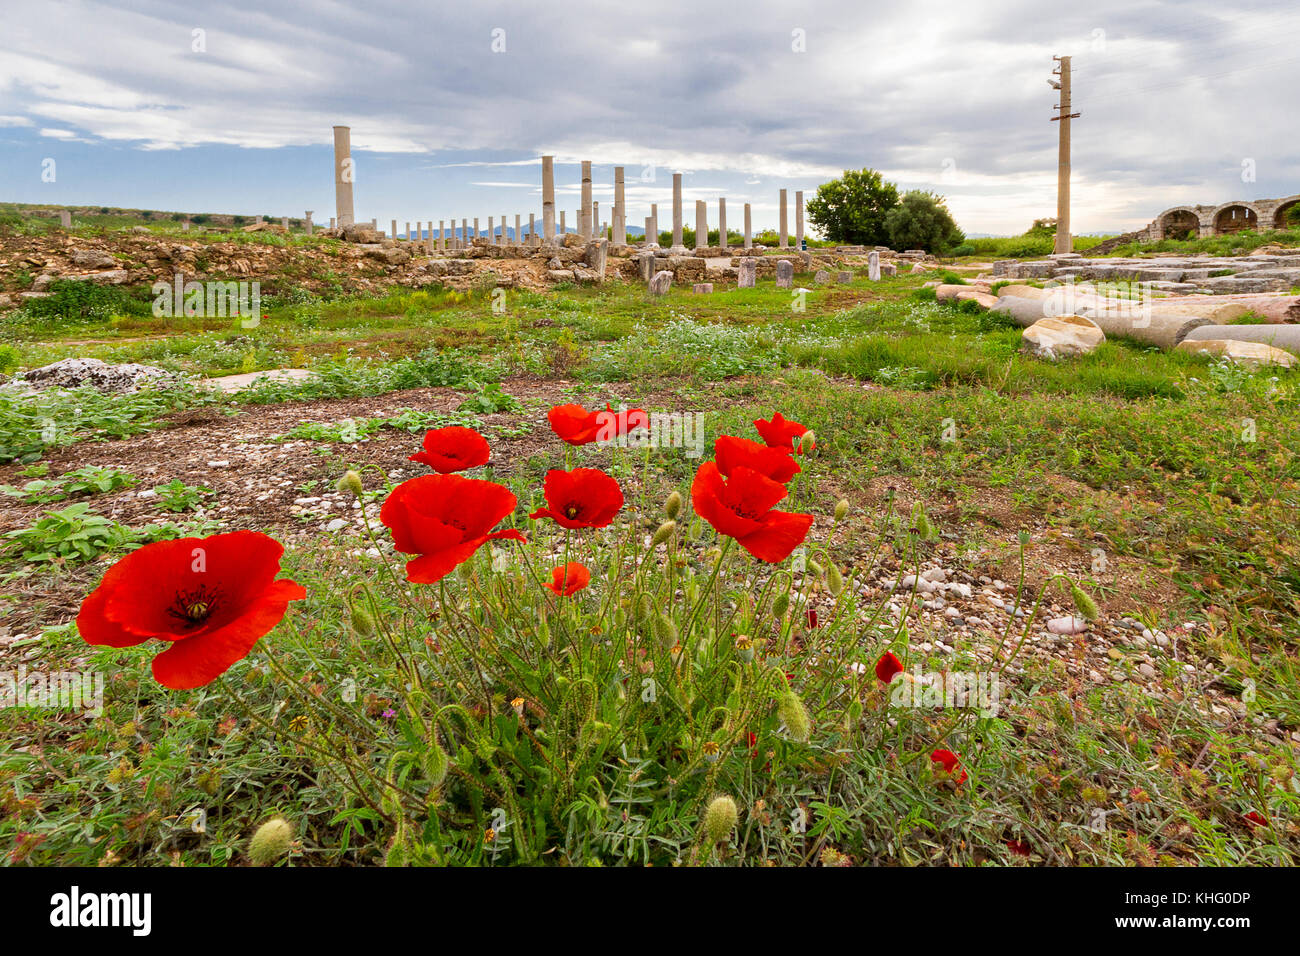 Ruins of the ancient site of Perge and red poppies in Antalya, Turkey. Stock Photo